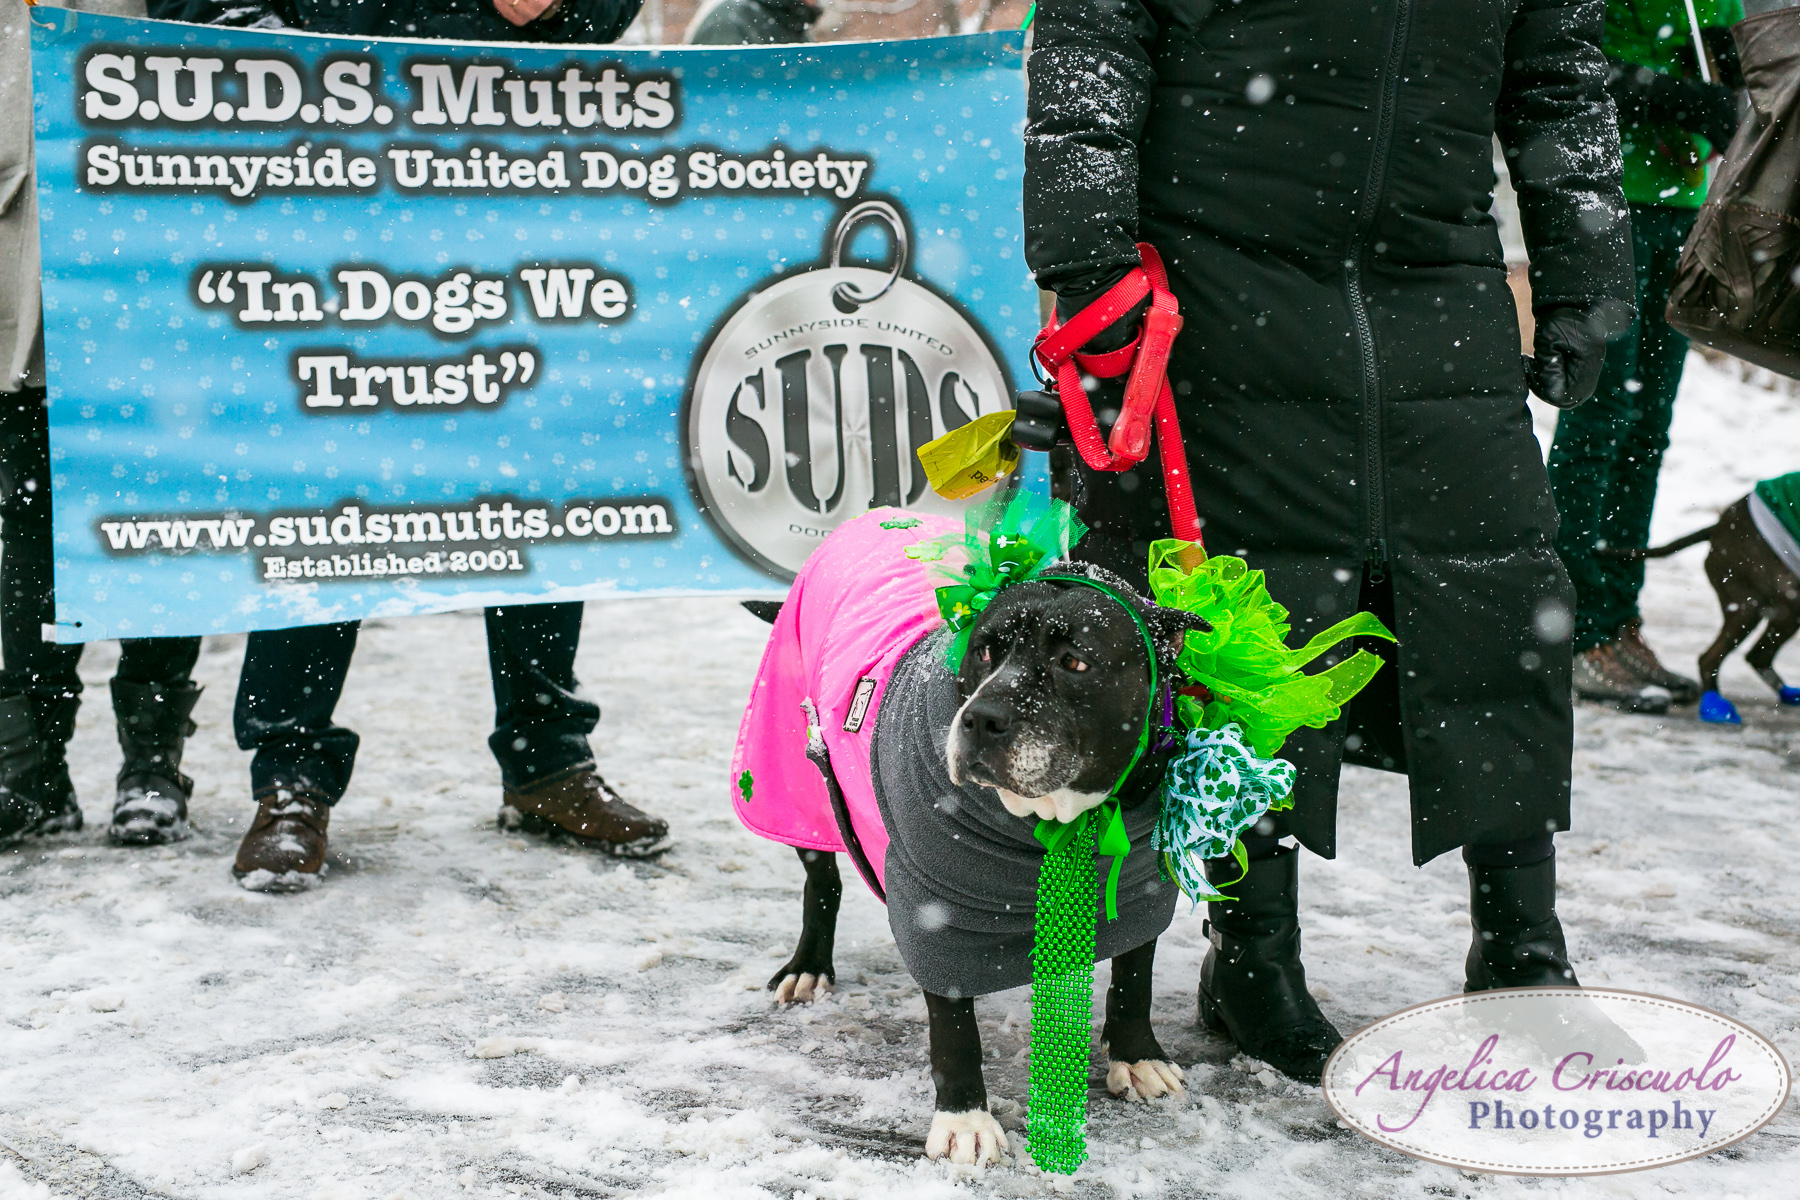 St.Patricks Day Parade Pitbull Mix Rescue Sean Casey Wes Paw Charlotte LIC Queens SUDS